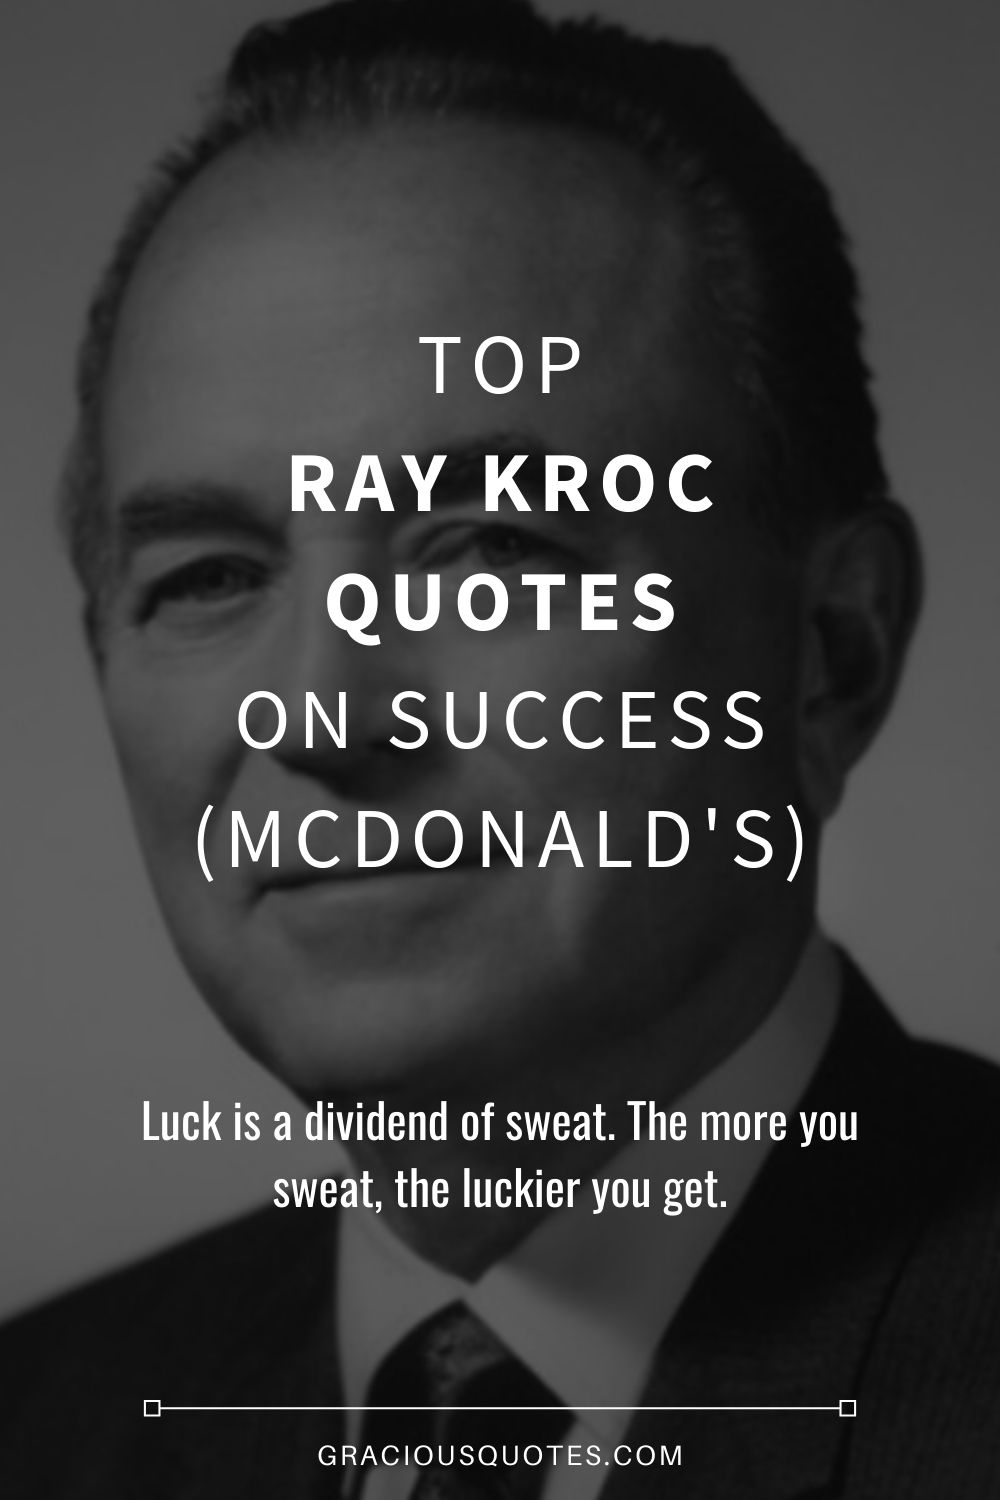 Top Ray Kroc Quotes on Success (MCDONALD'S) - Gracious Quotes